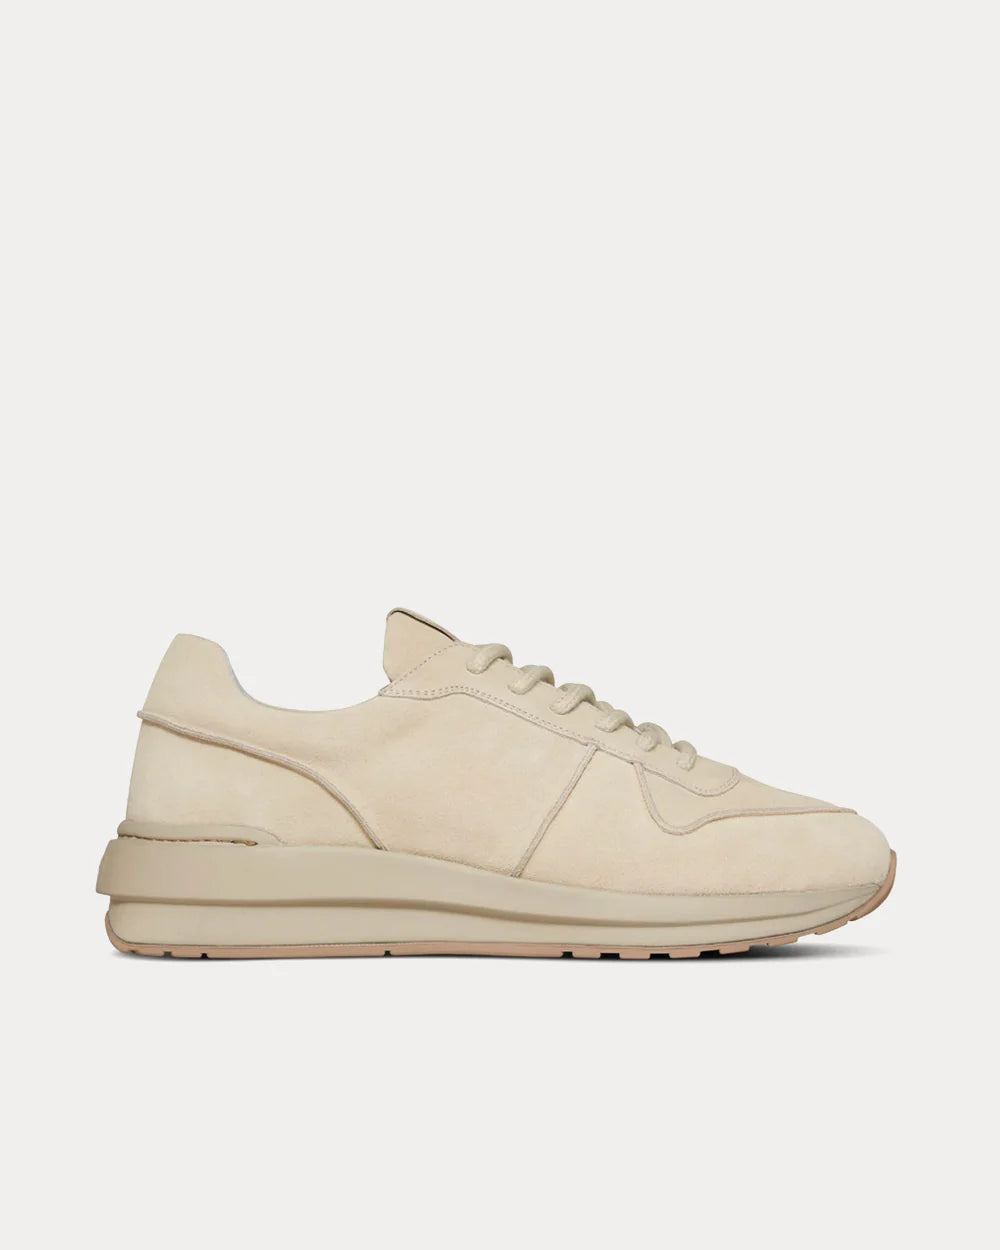 Roscomar beige suede clay sole unisex trainers